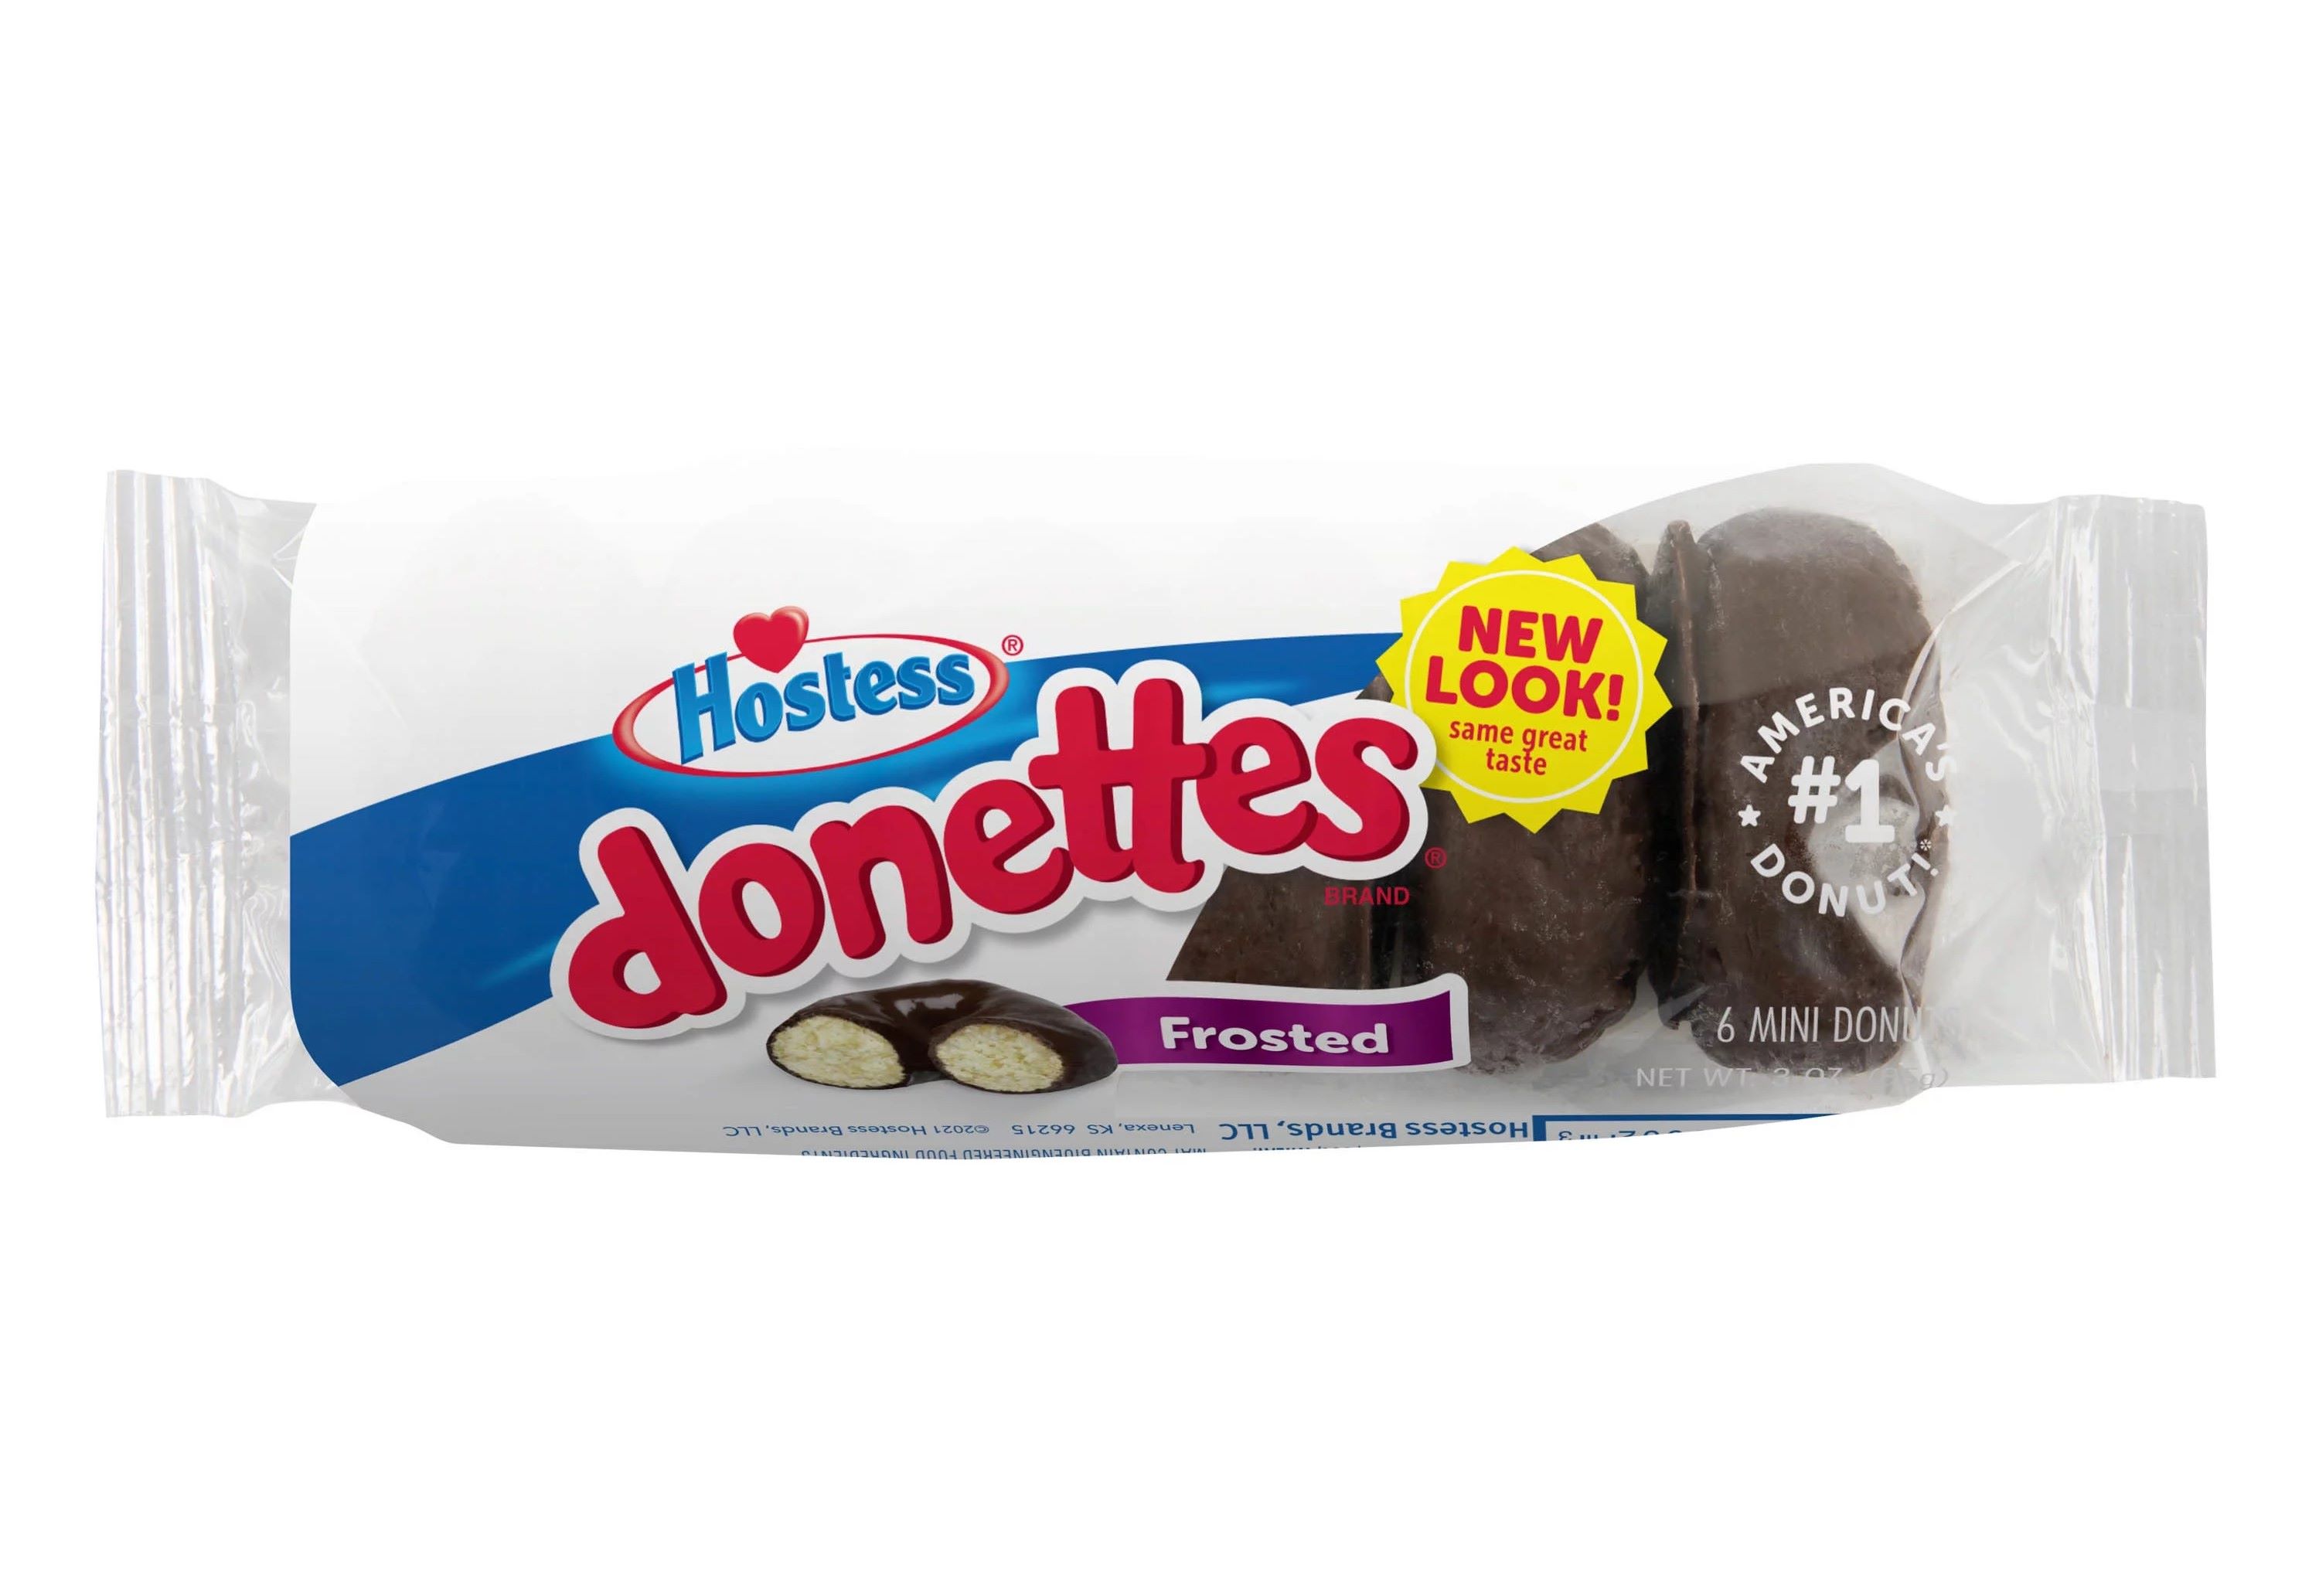 11-hostess-donuts-nutrition-facts